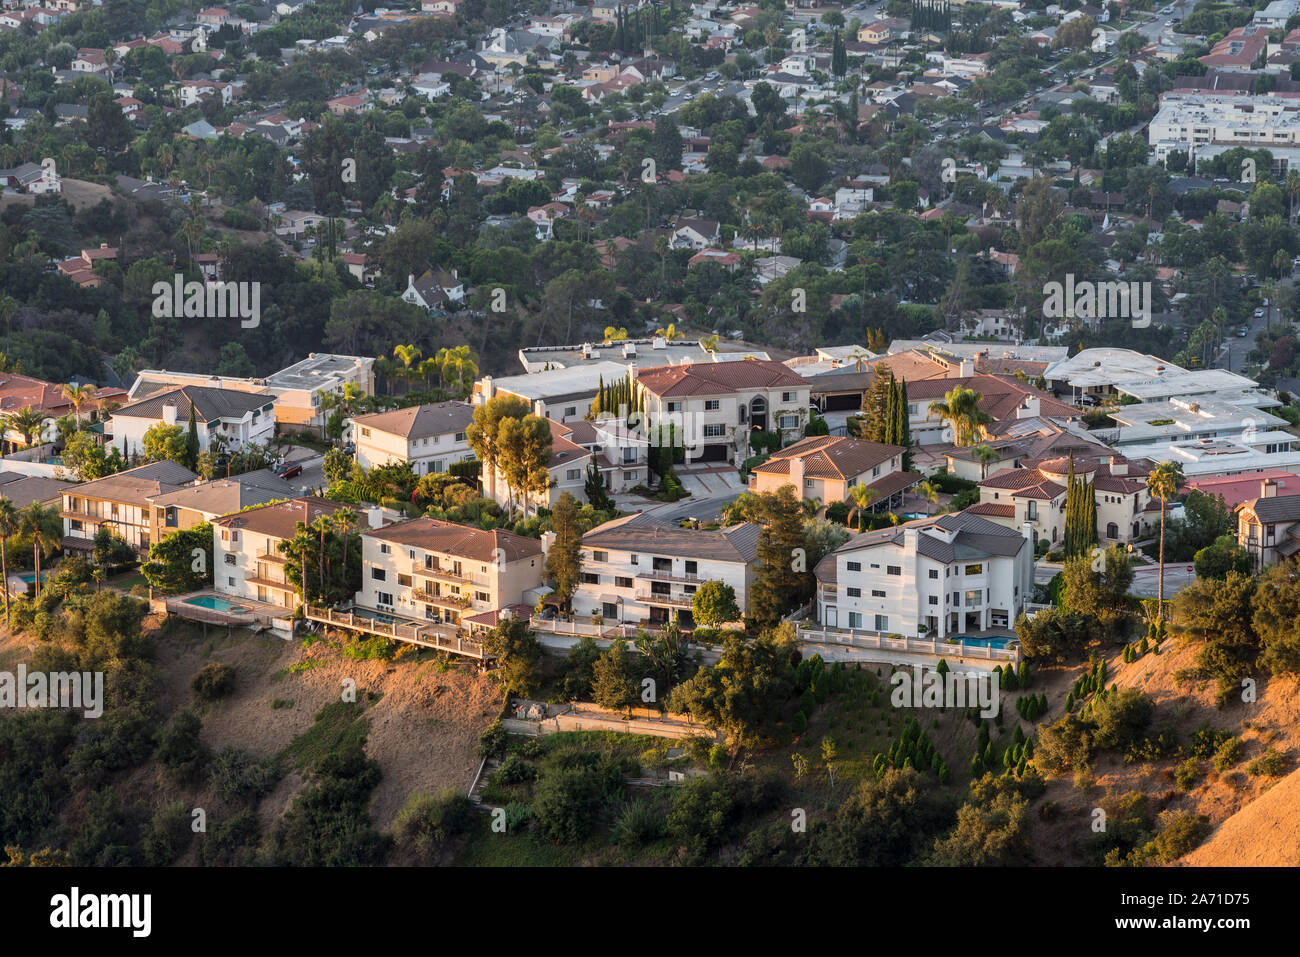 Early morning view of hilltop homes near Los Angeles and Burbank in Glendale, California. Stock Photo